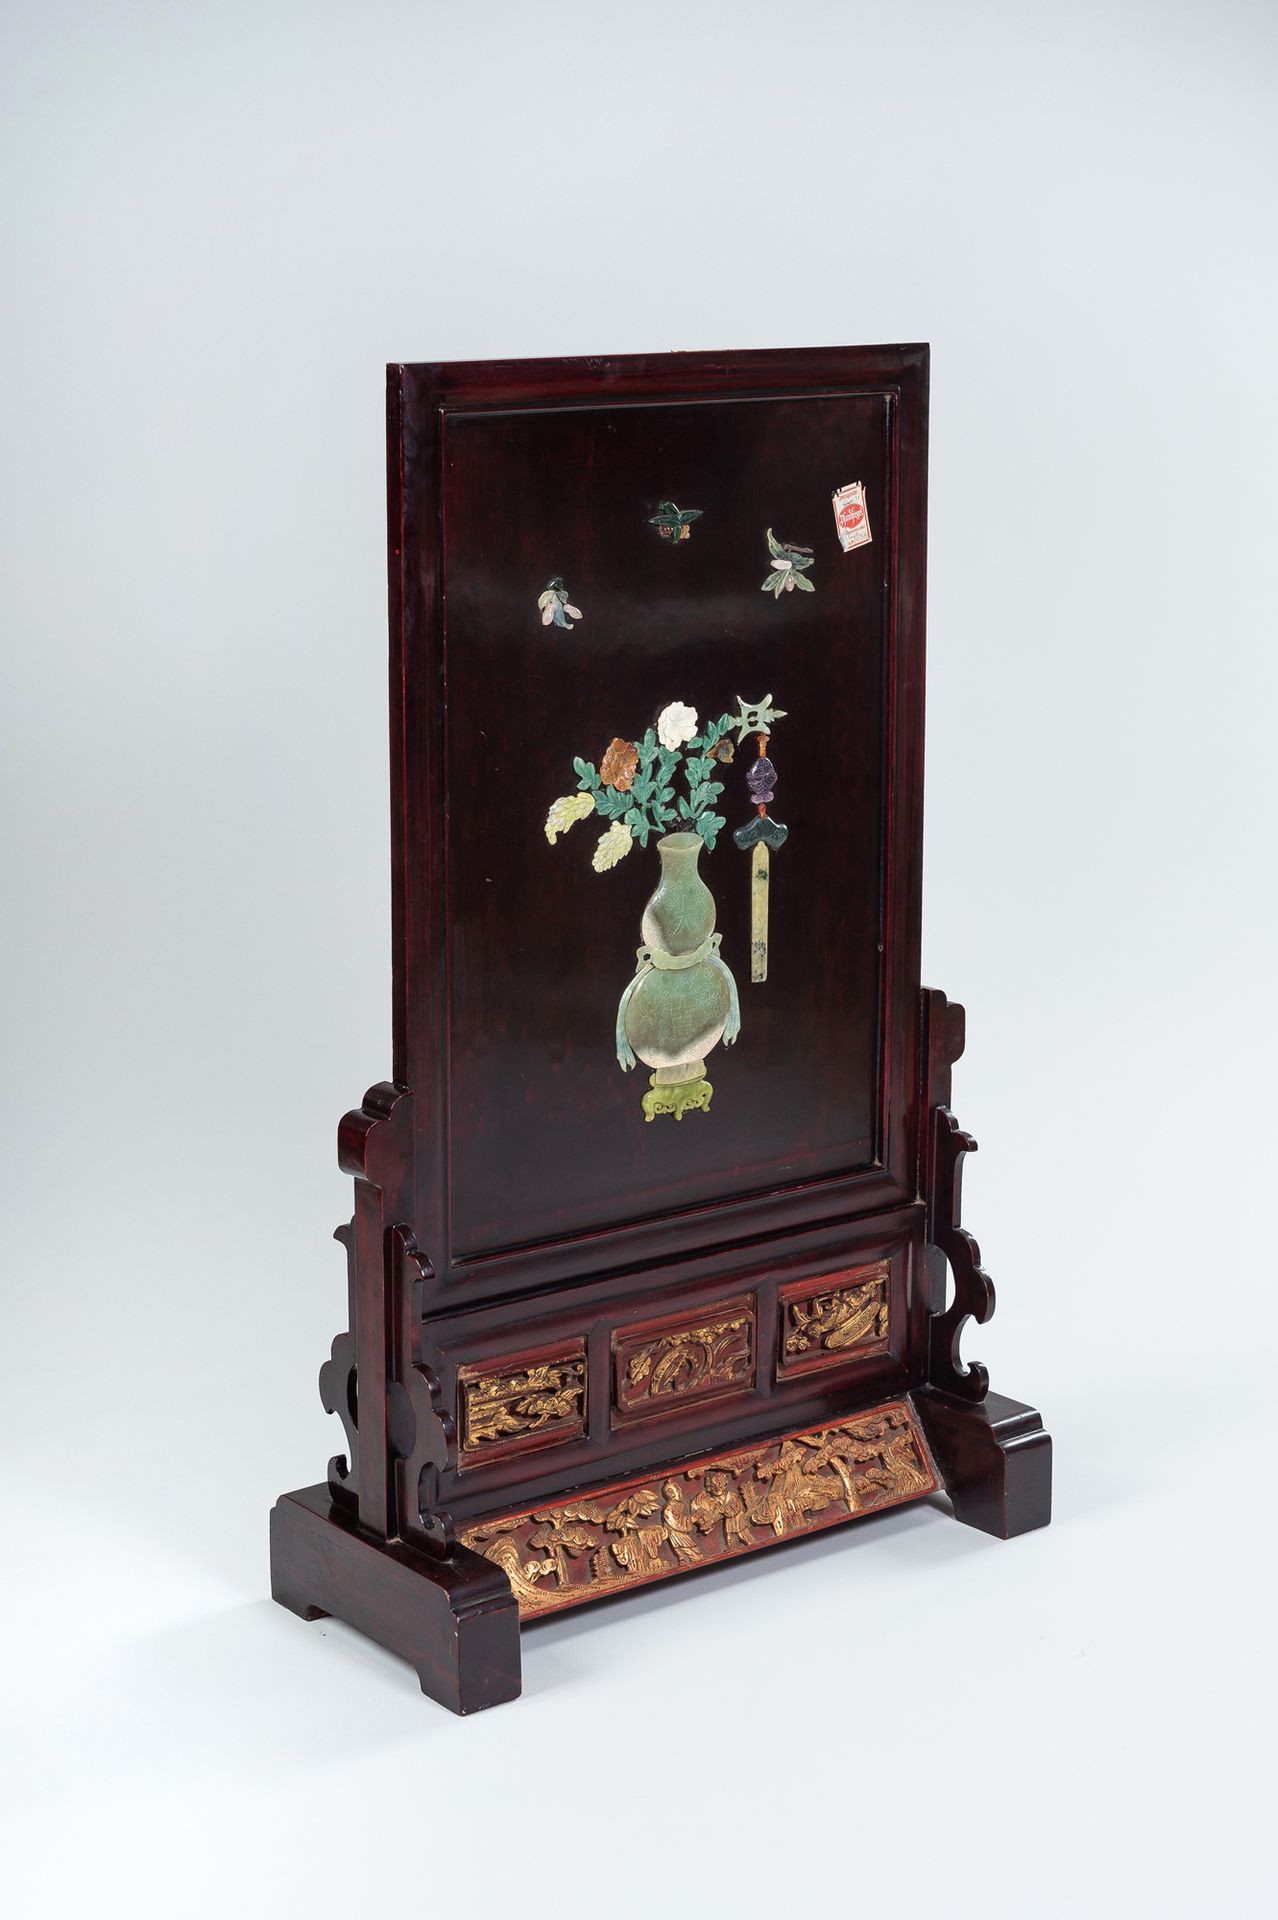 A LACQUERED WOOD TABLE SCREEN WITH INLAYS 
中国，清末（1644-1912年），一个带镶嵌物的硬木桌屏。面板上有硬石、&hellip;